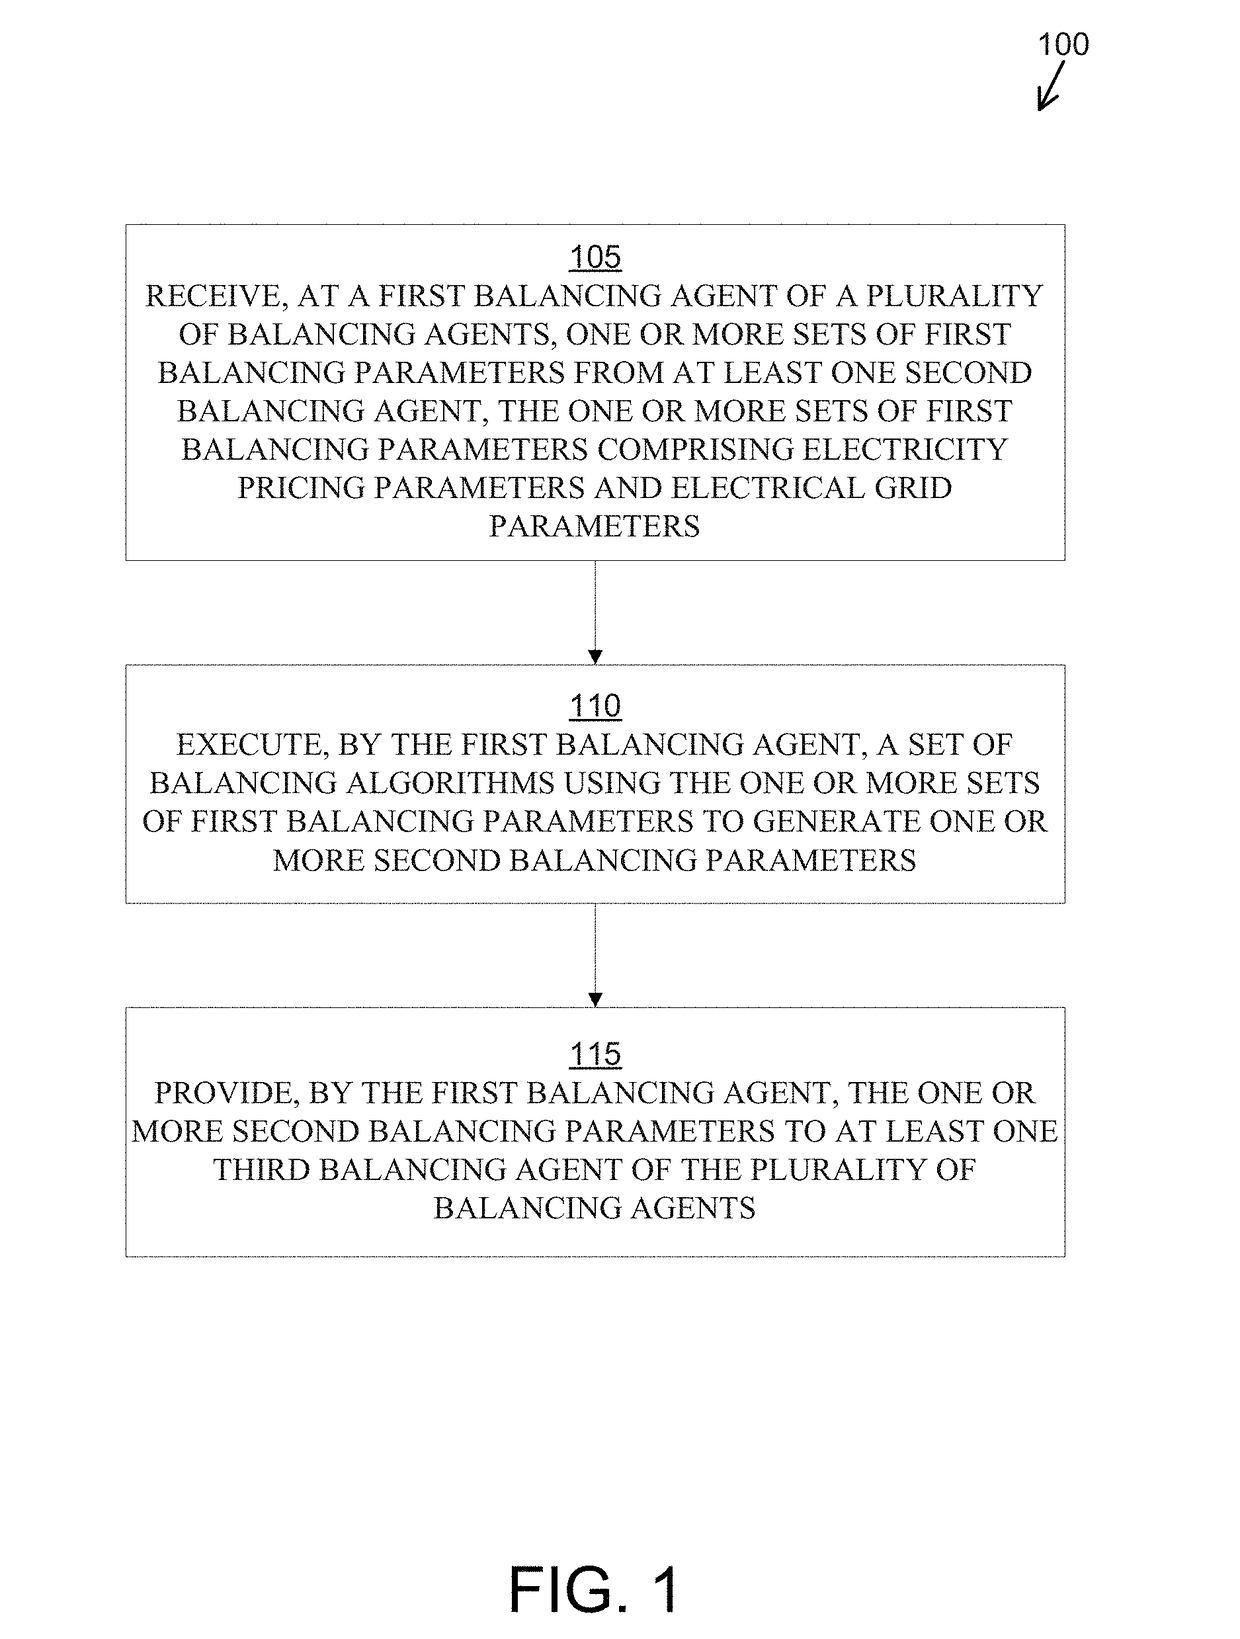 Distributed methods and software for balancing supply and demand in an electric power network